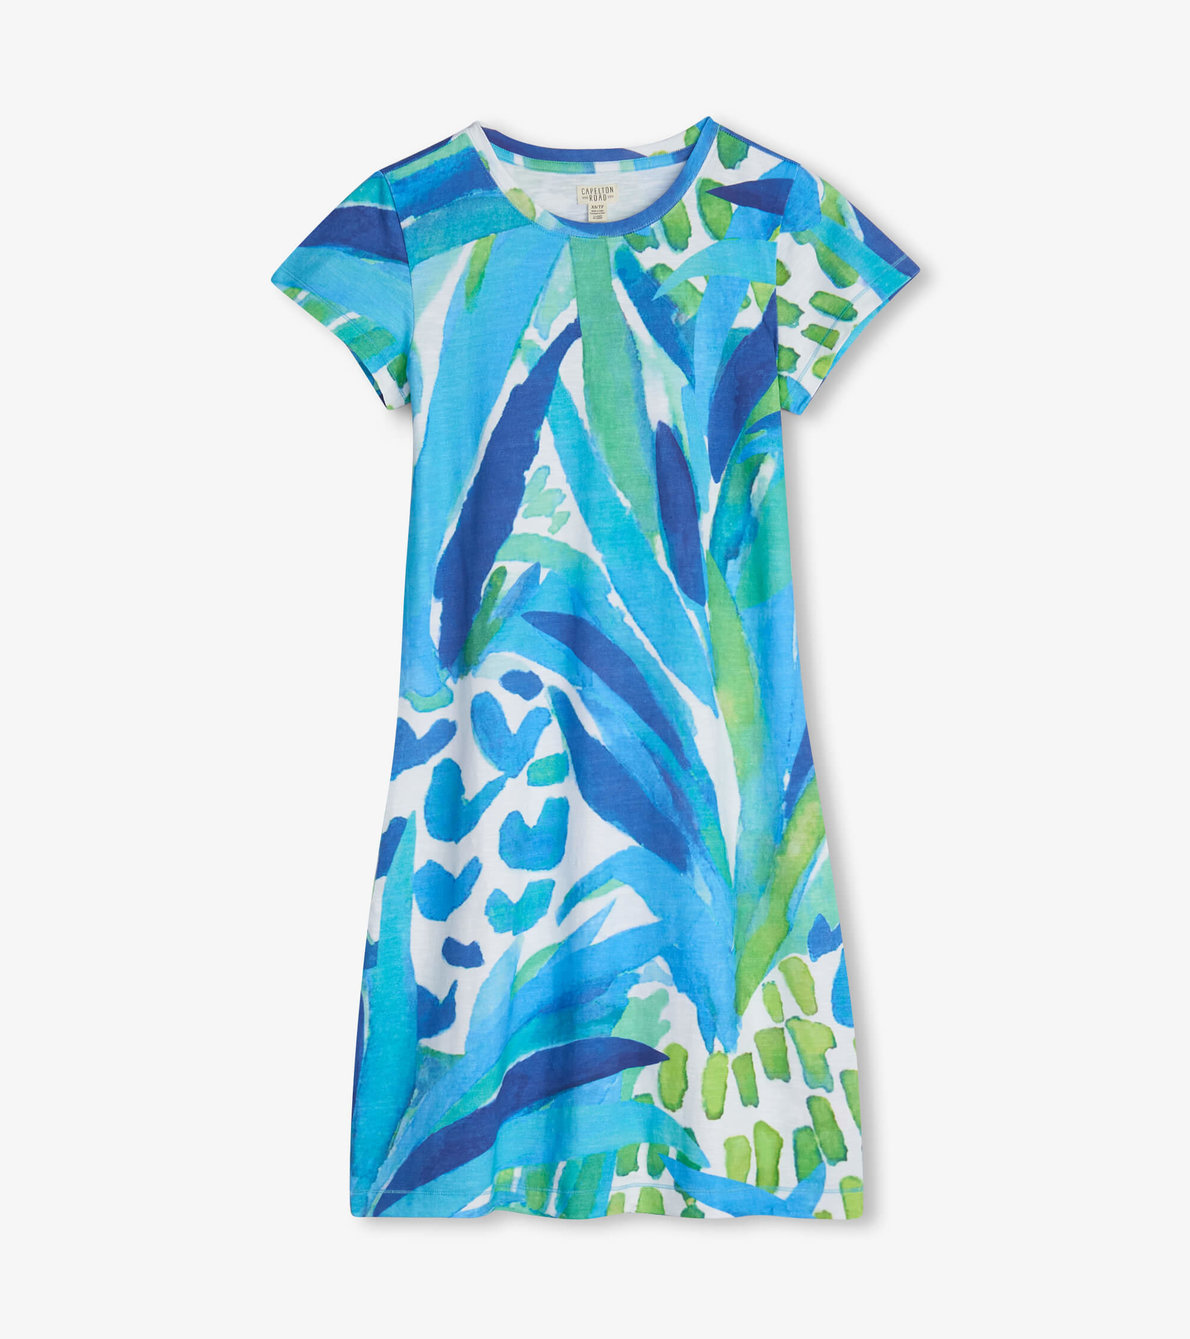 View larger image of Women's Painted Pineapples Crew Neck T-Shirt Dress